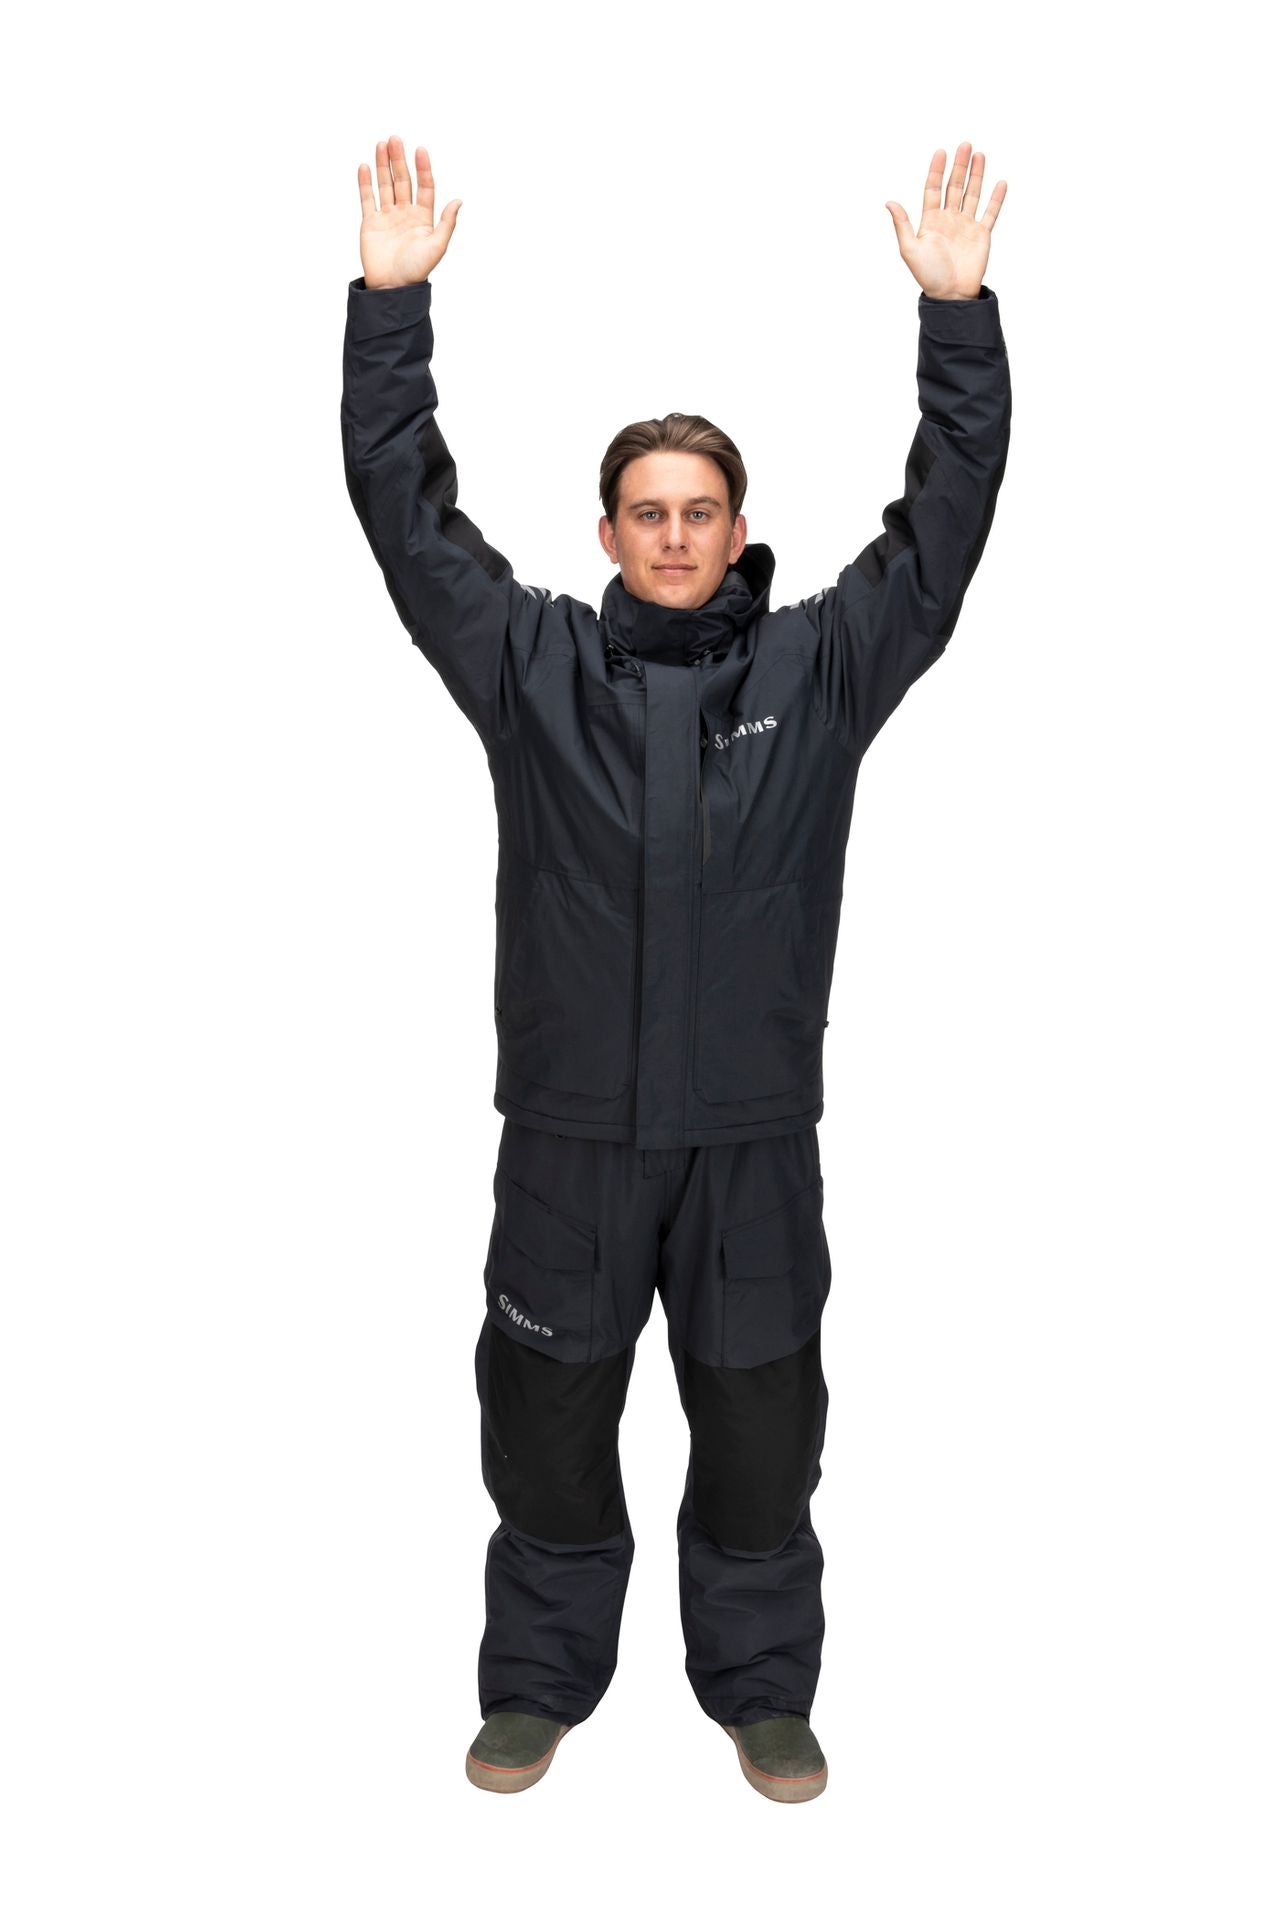 SIMMS CHALLENGER INSULATED JACKET BLACK